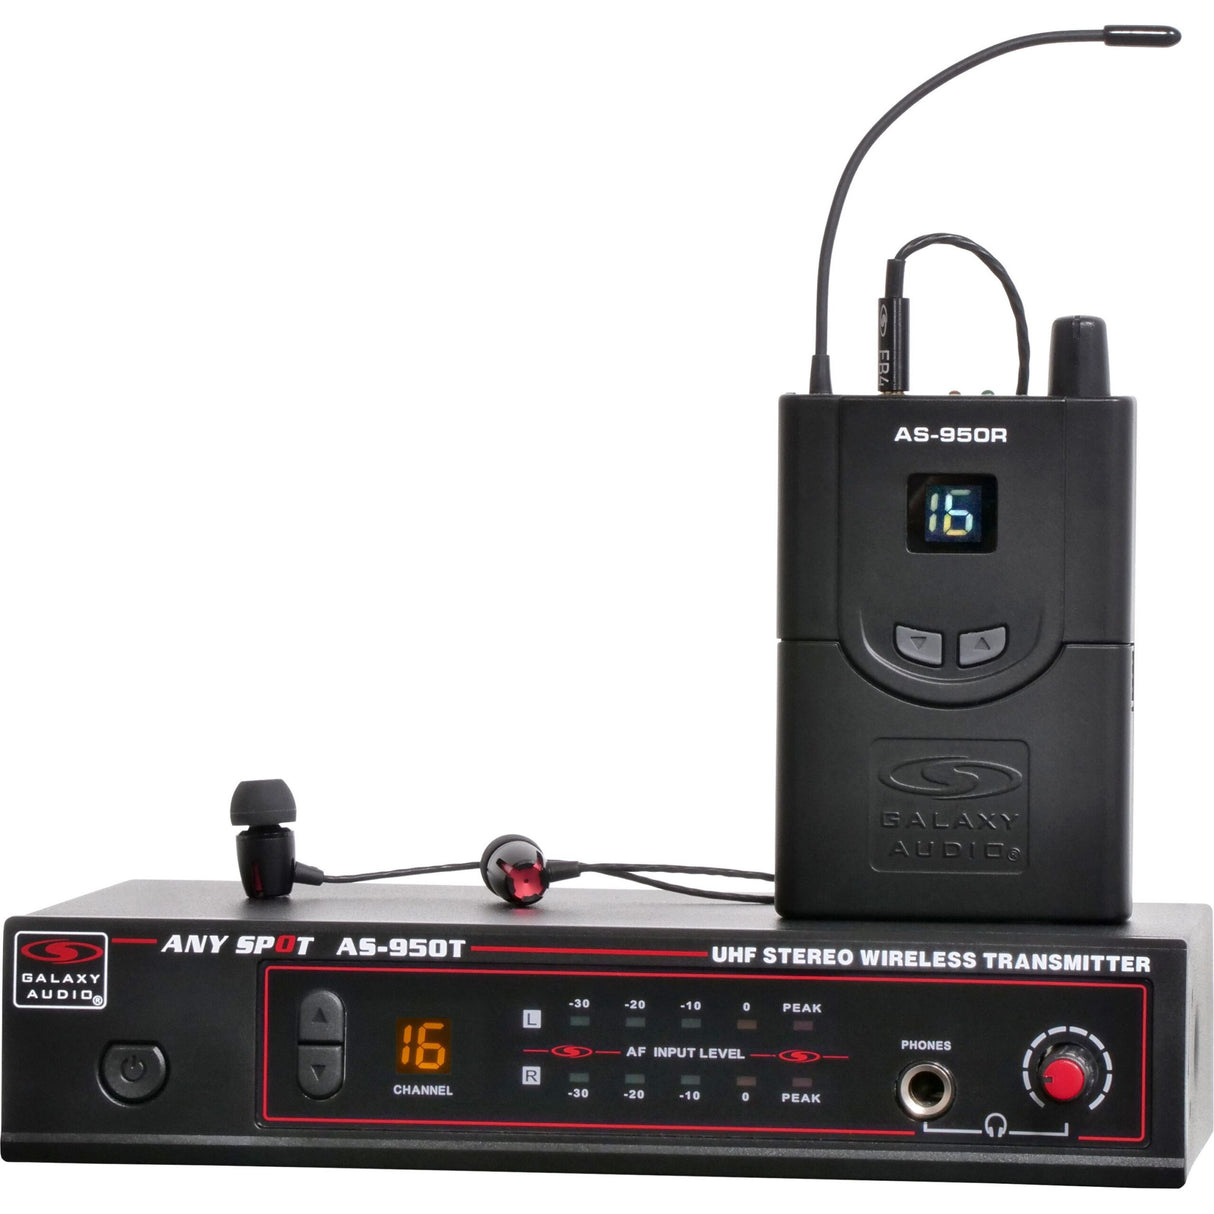 Galaxy Audio AS-950N 16 Channel Stereo Wireless Personal In-Ear Monitor System, 518-542 MHz